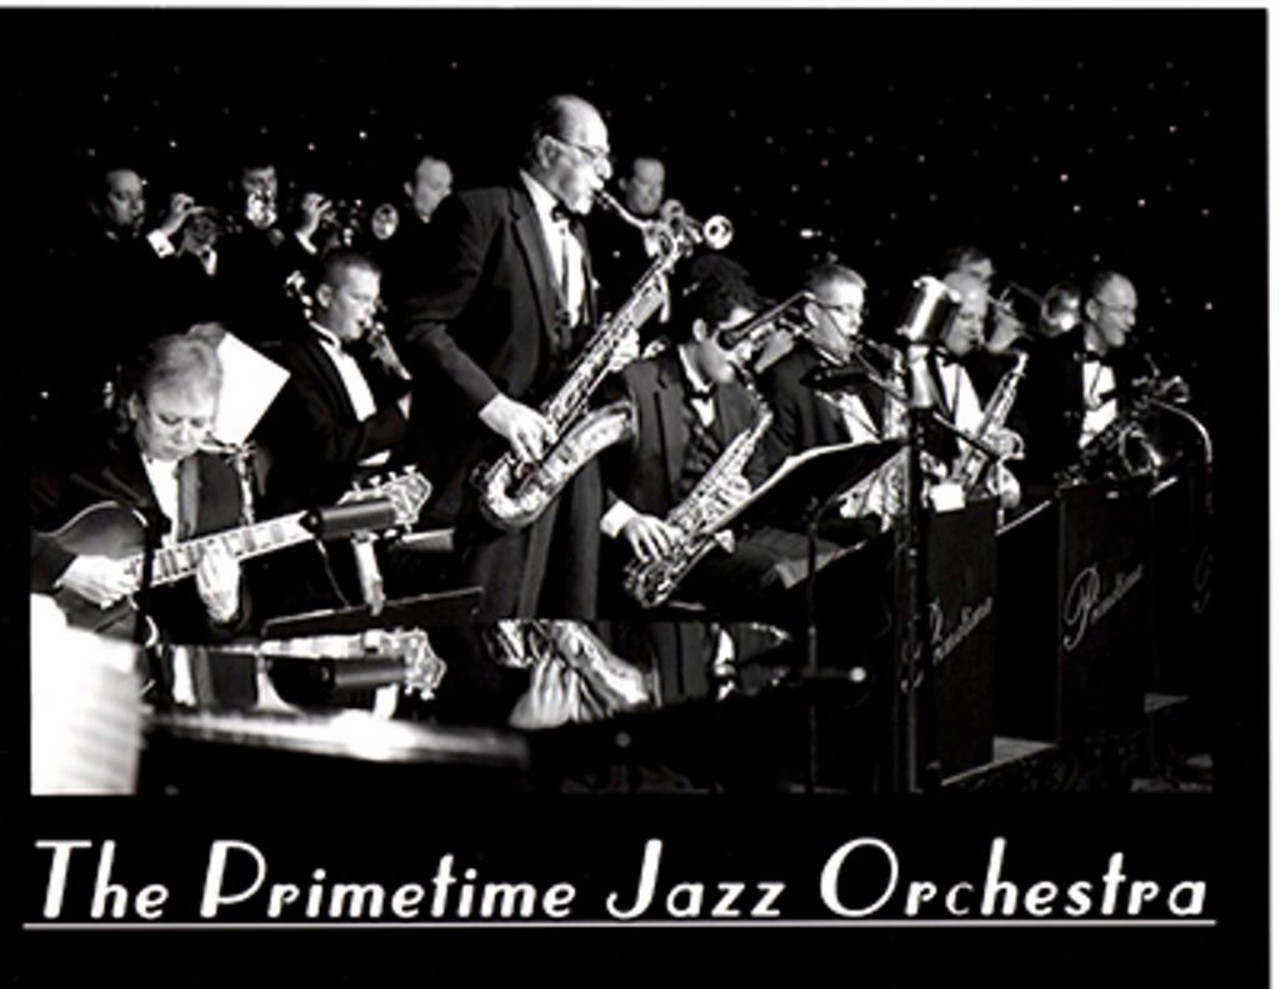  Primetime Jazz Orchestra 
Wednesdays, 8-10 p.m. Continues through Aug. 30, The Cove, 606 W. Cypress St.